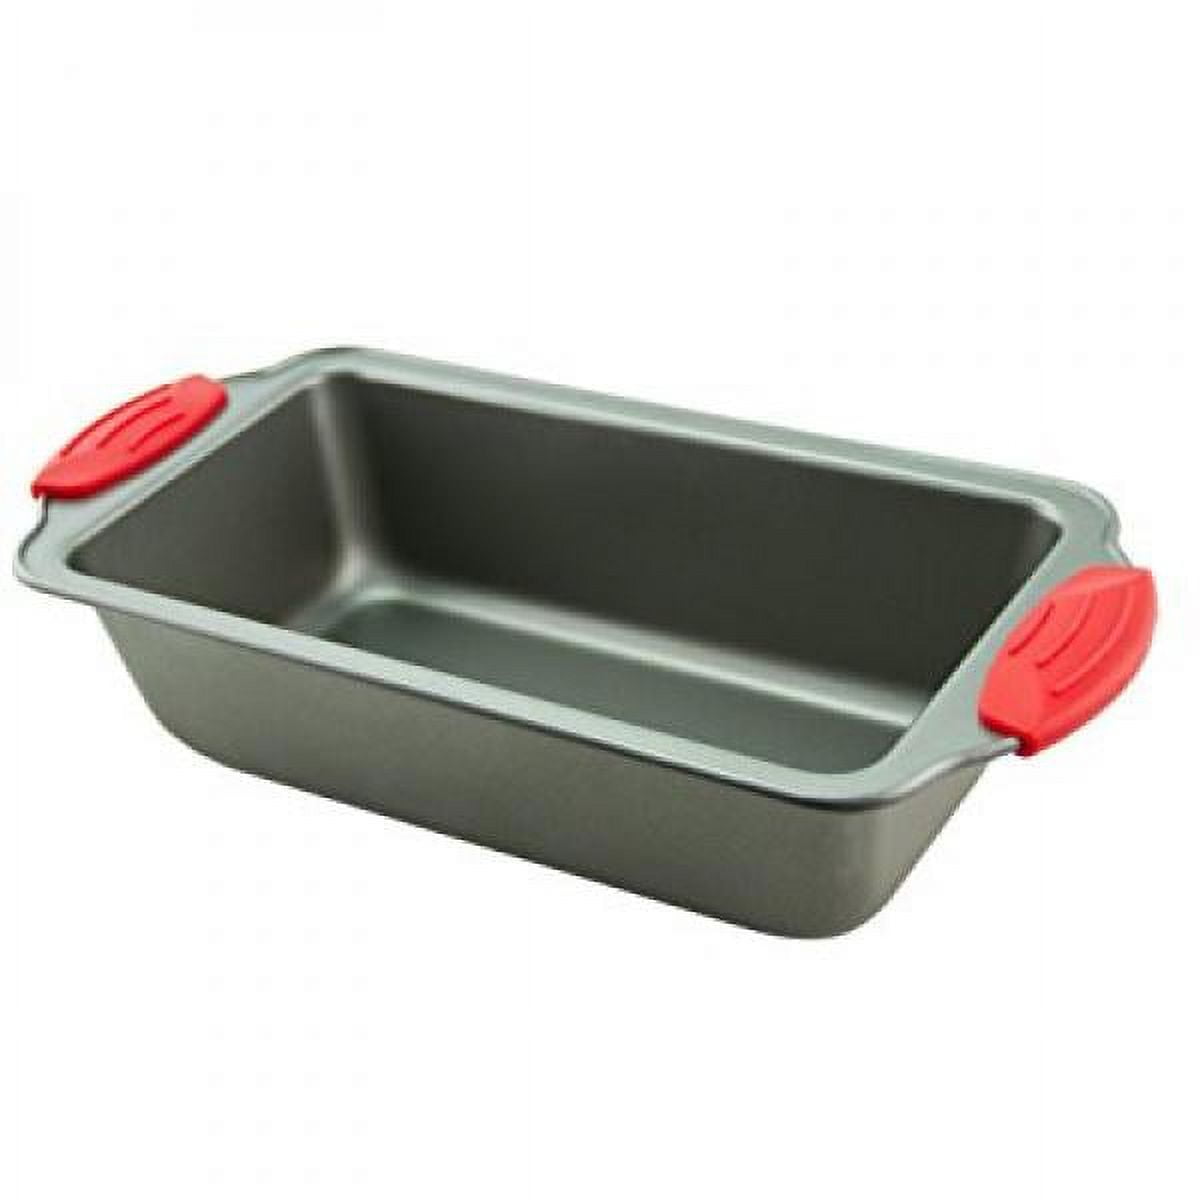 Bread Loaf Pan Baking Mould, Silicone Bread Pans 13.6x9.4 inch